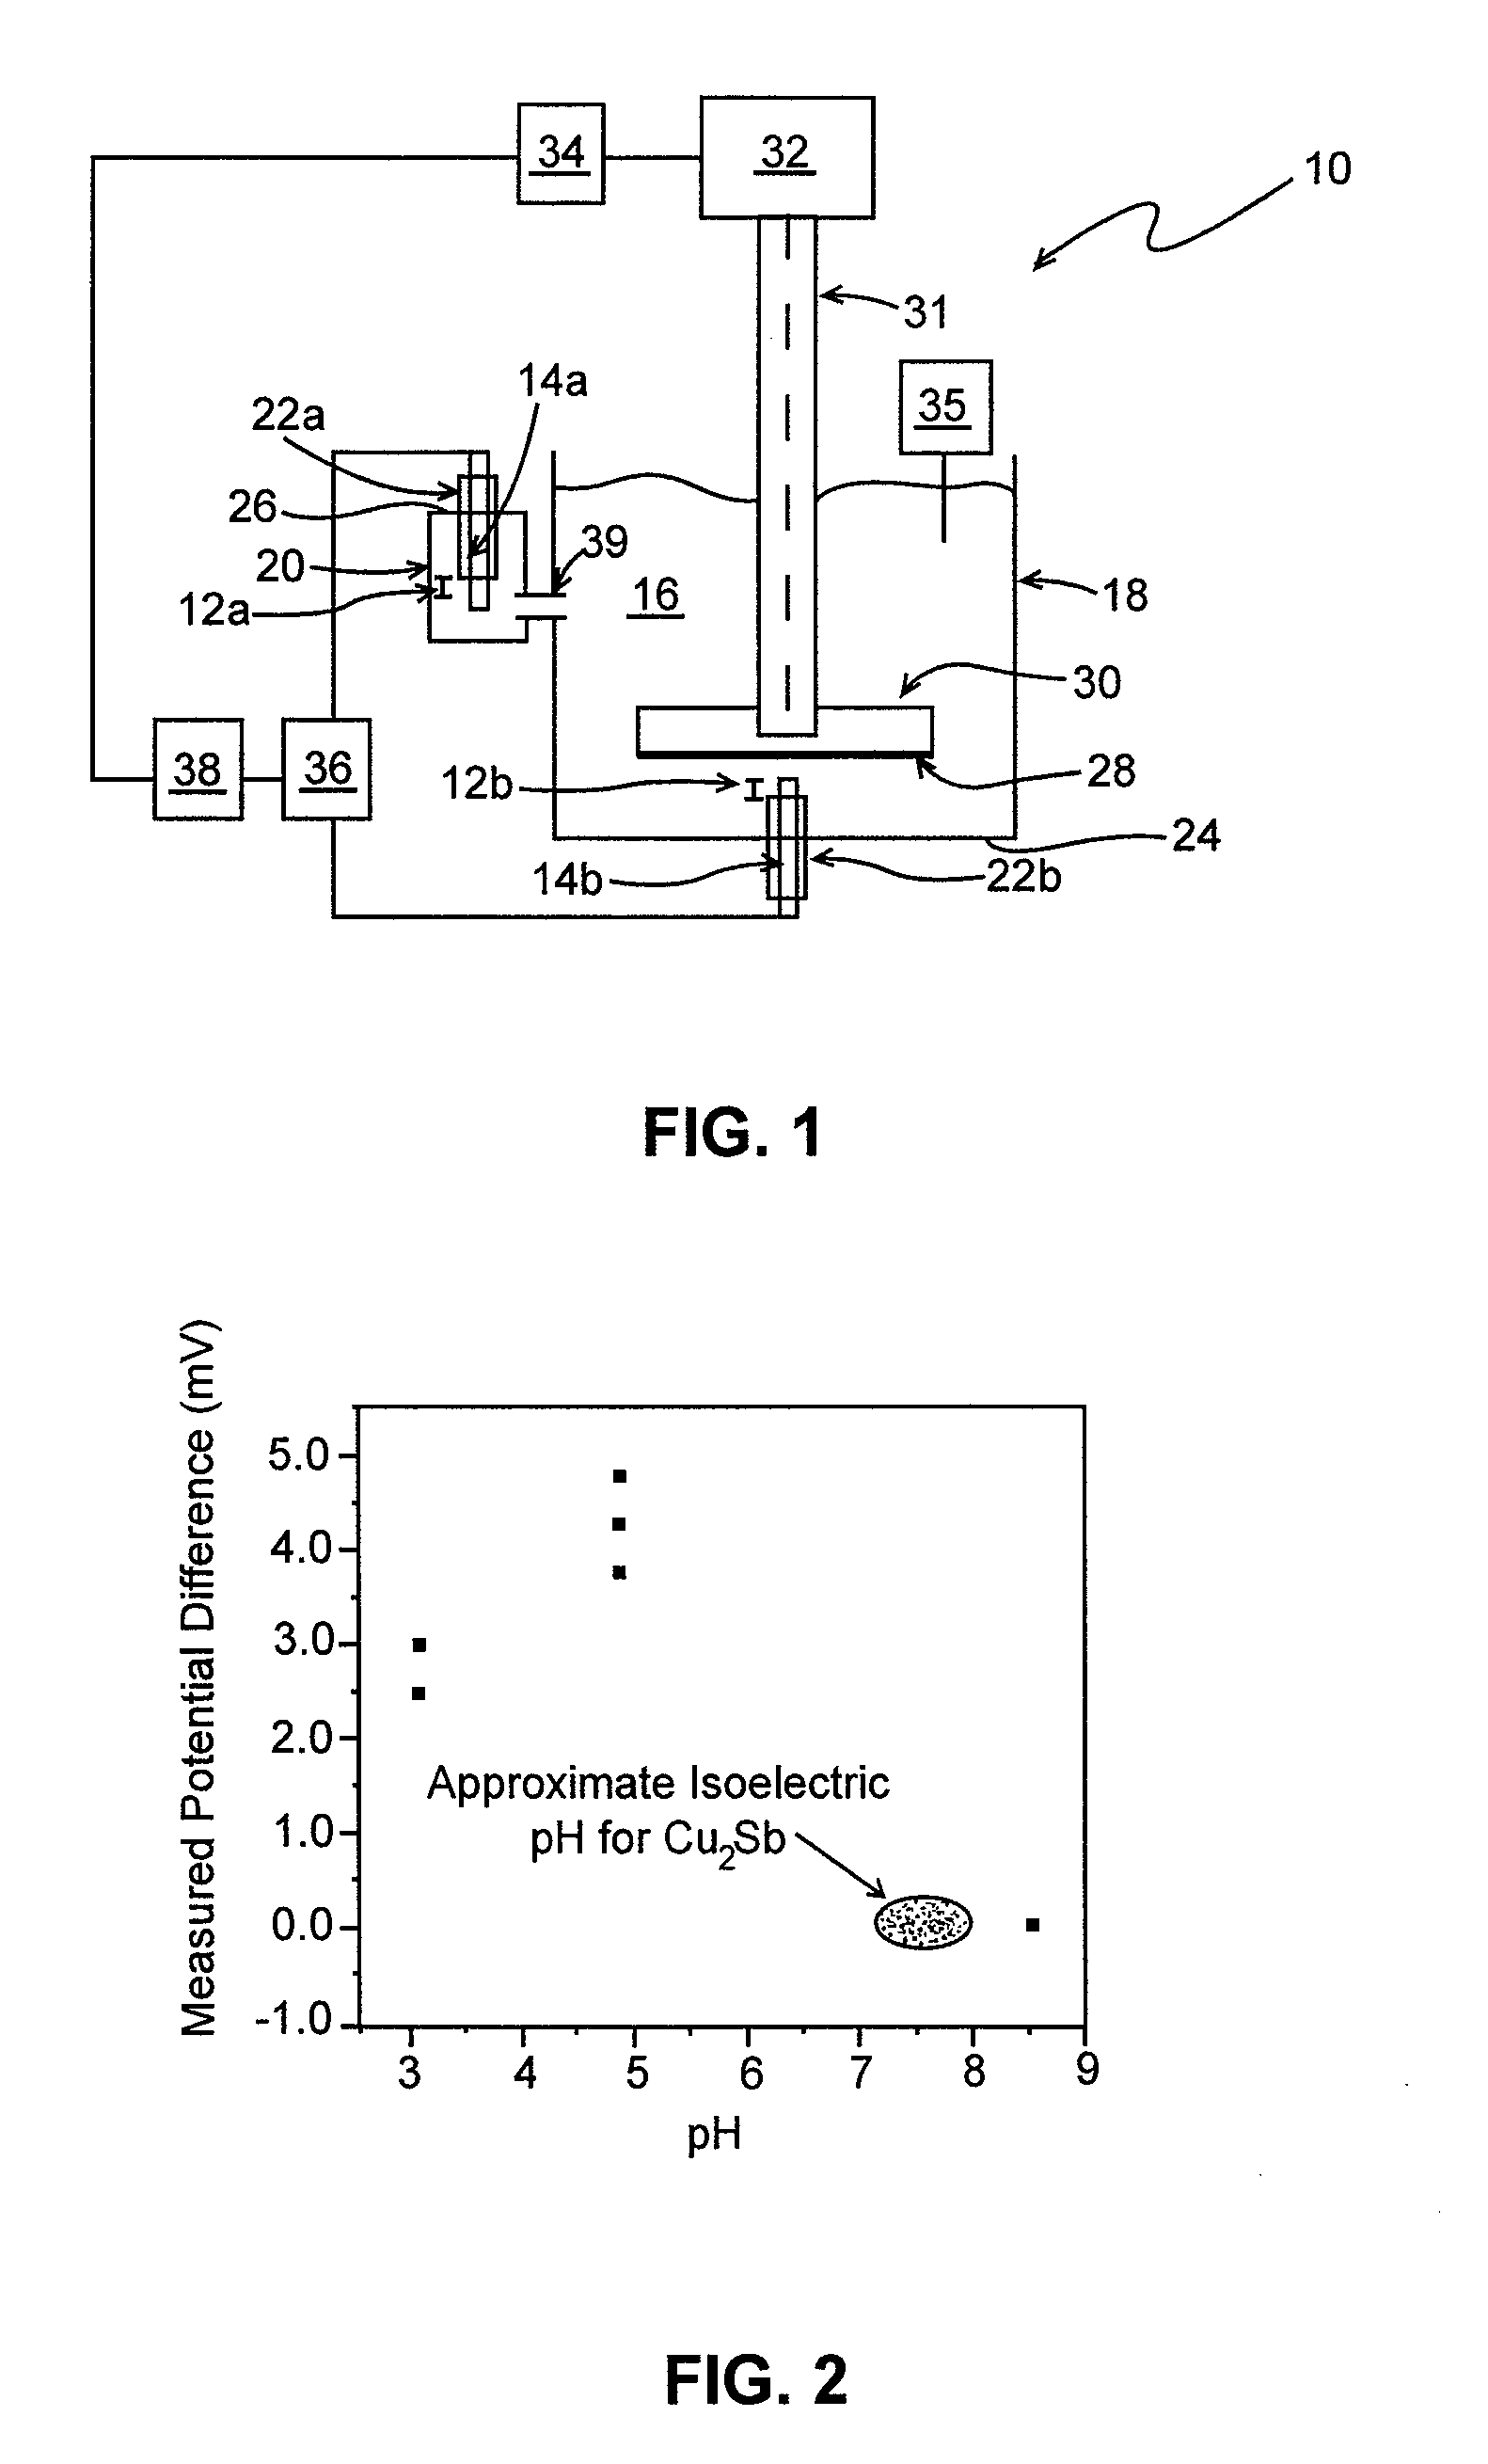 Self-assembly of coatings utilizing surface charge